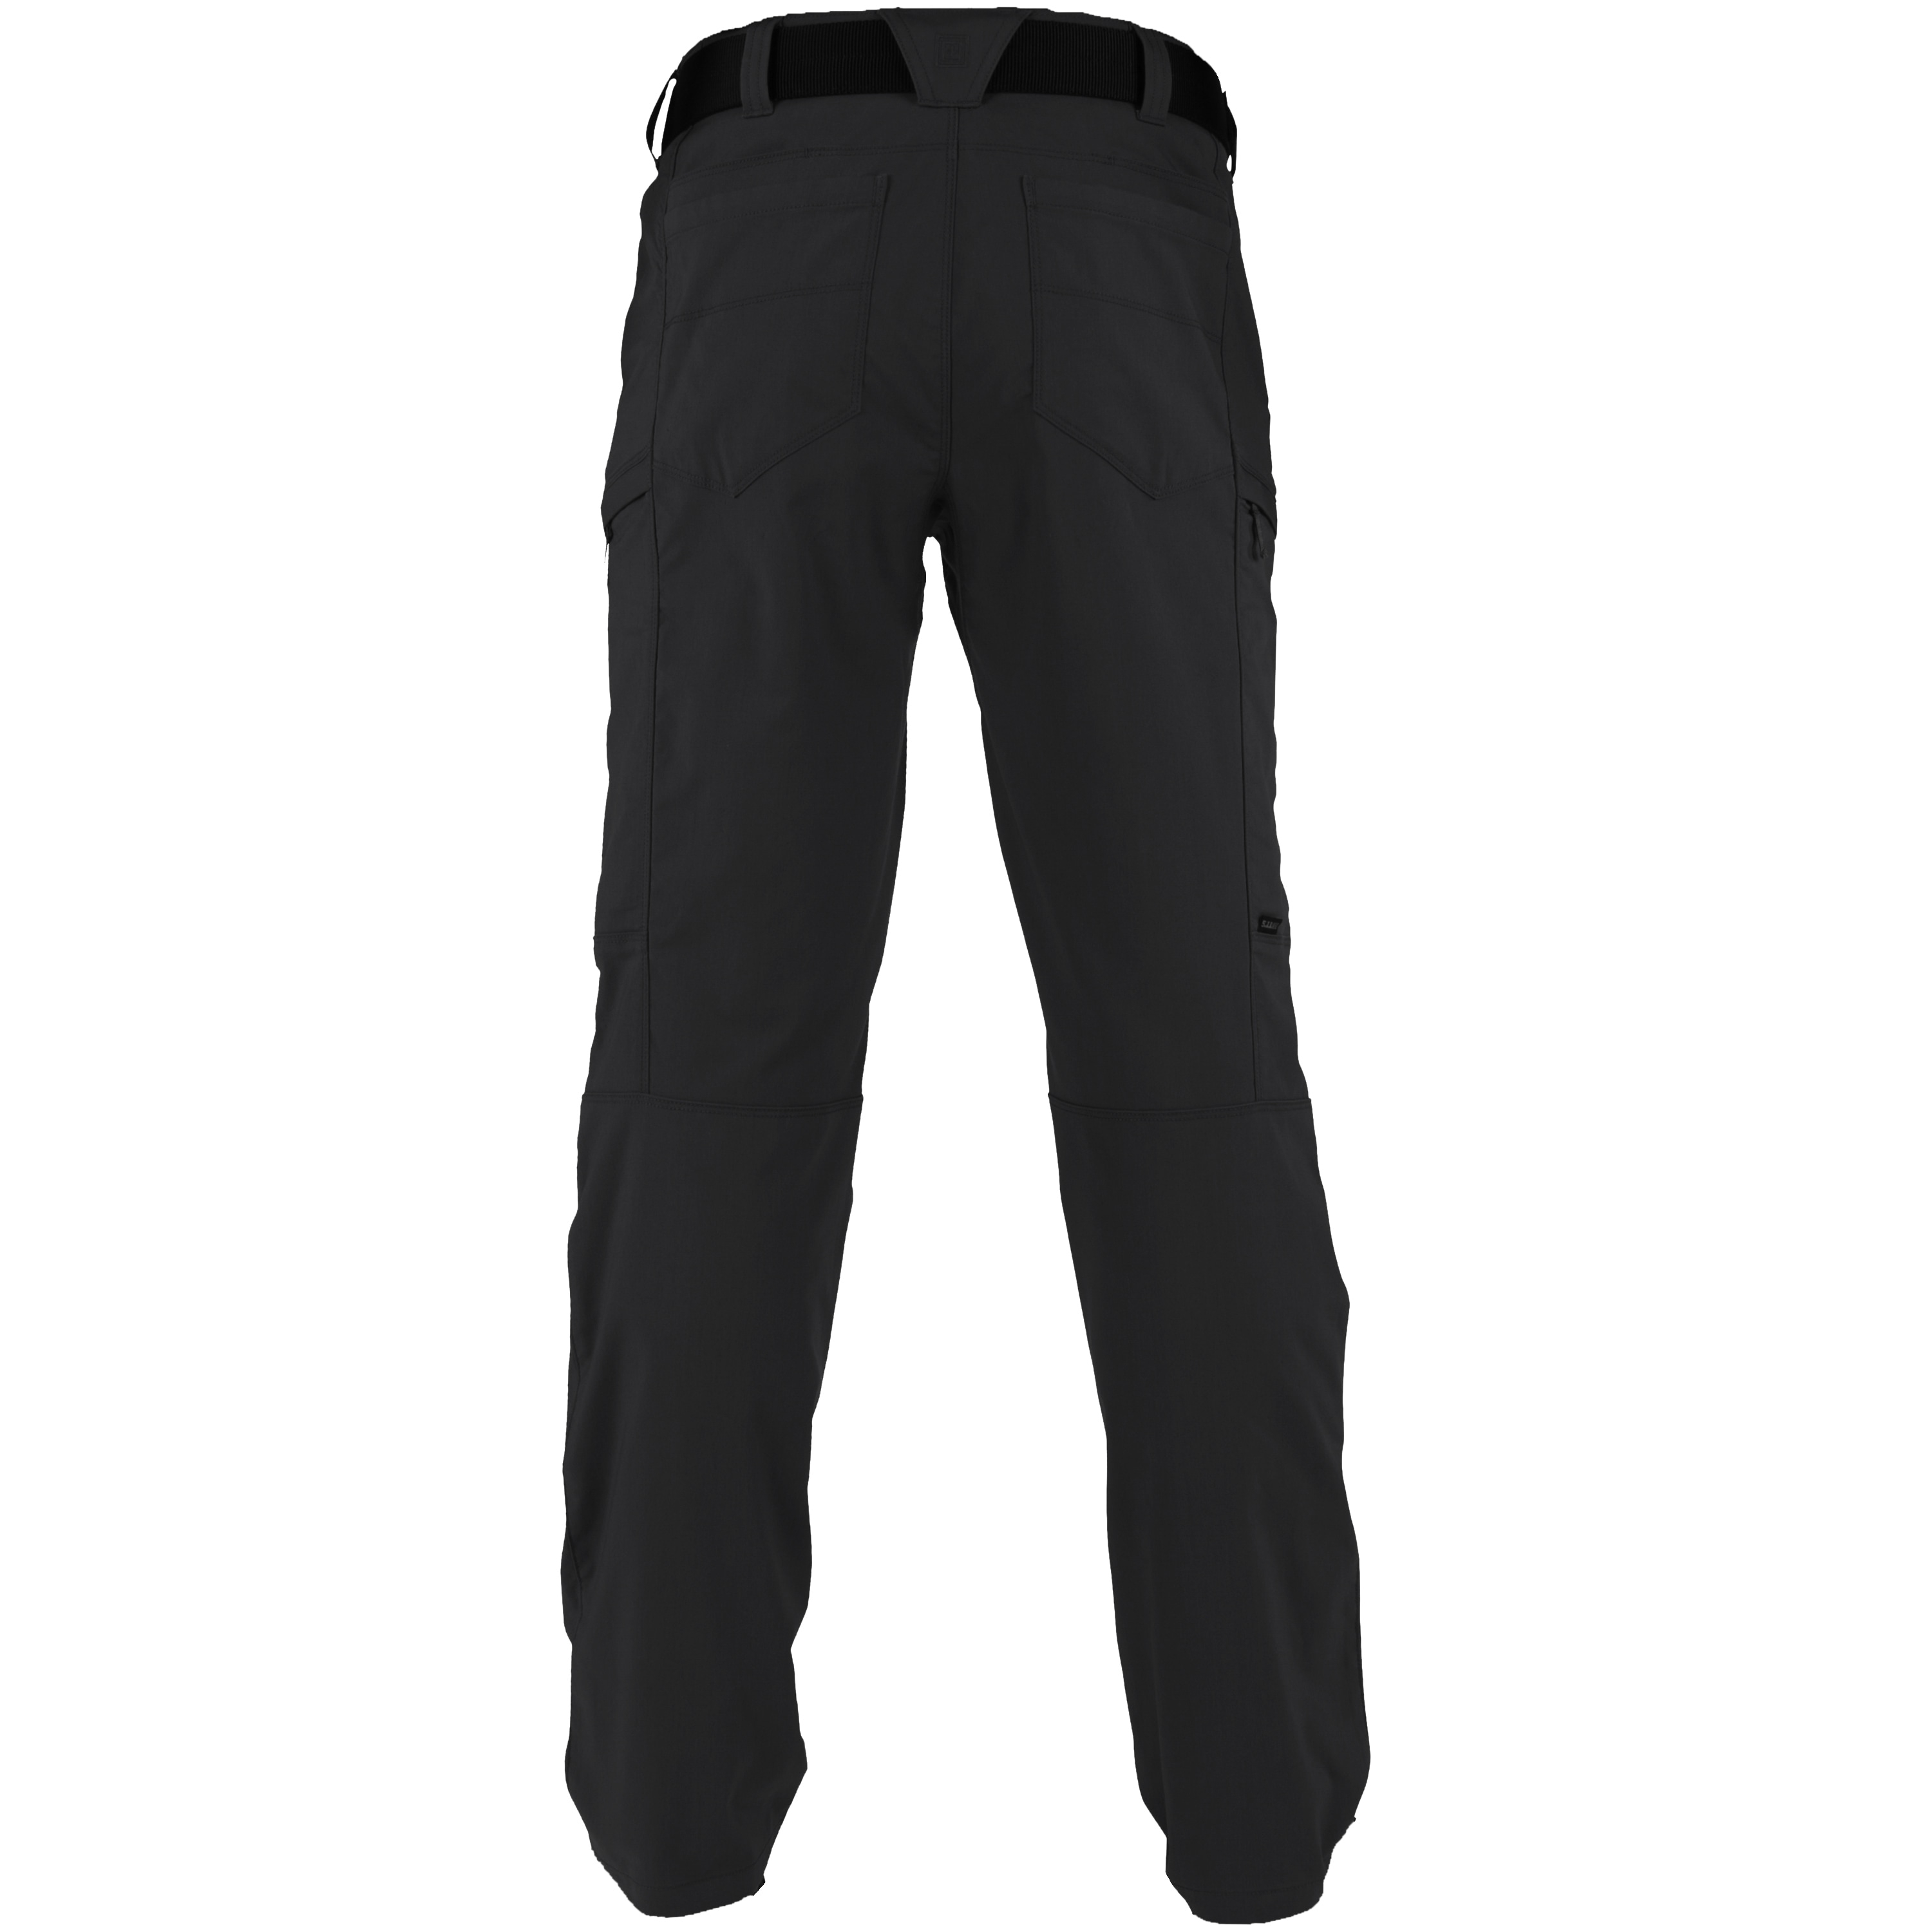 Purchase the 5.11 Pants Apex black by ASMC